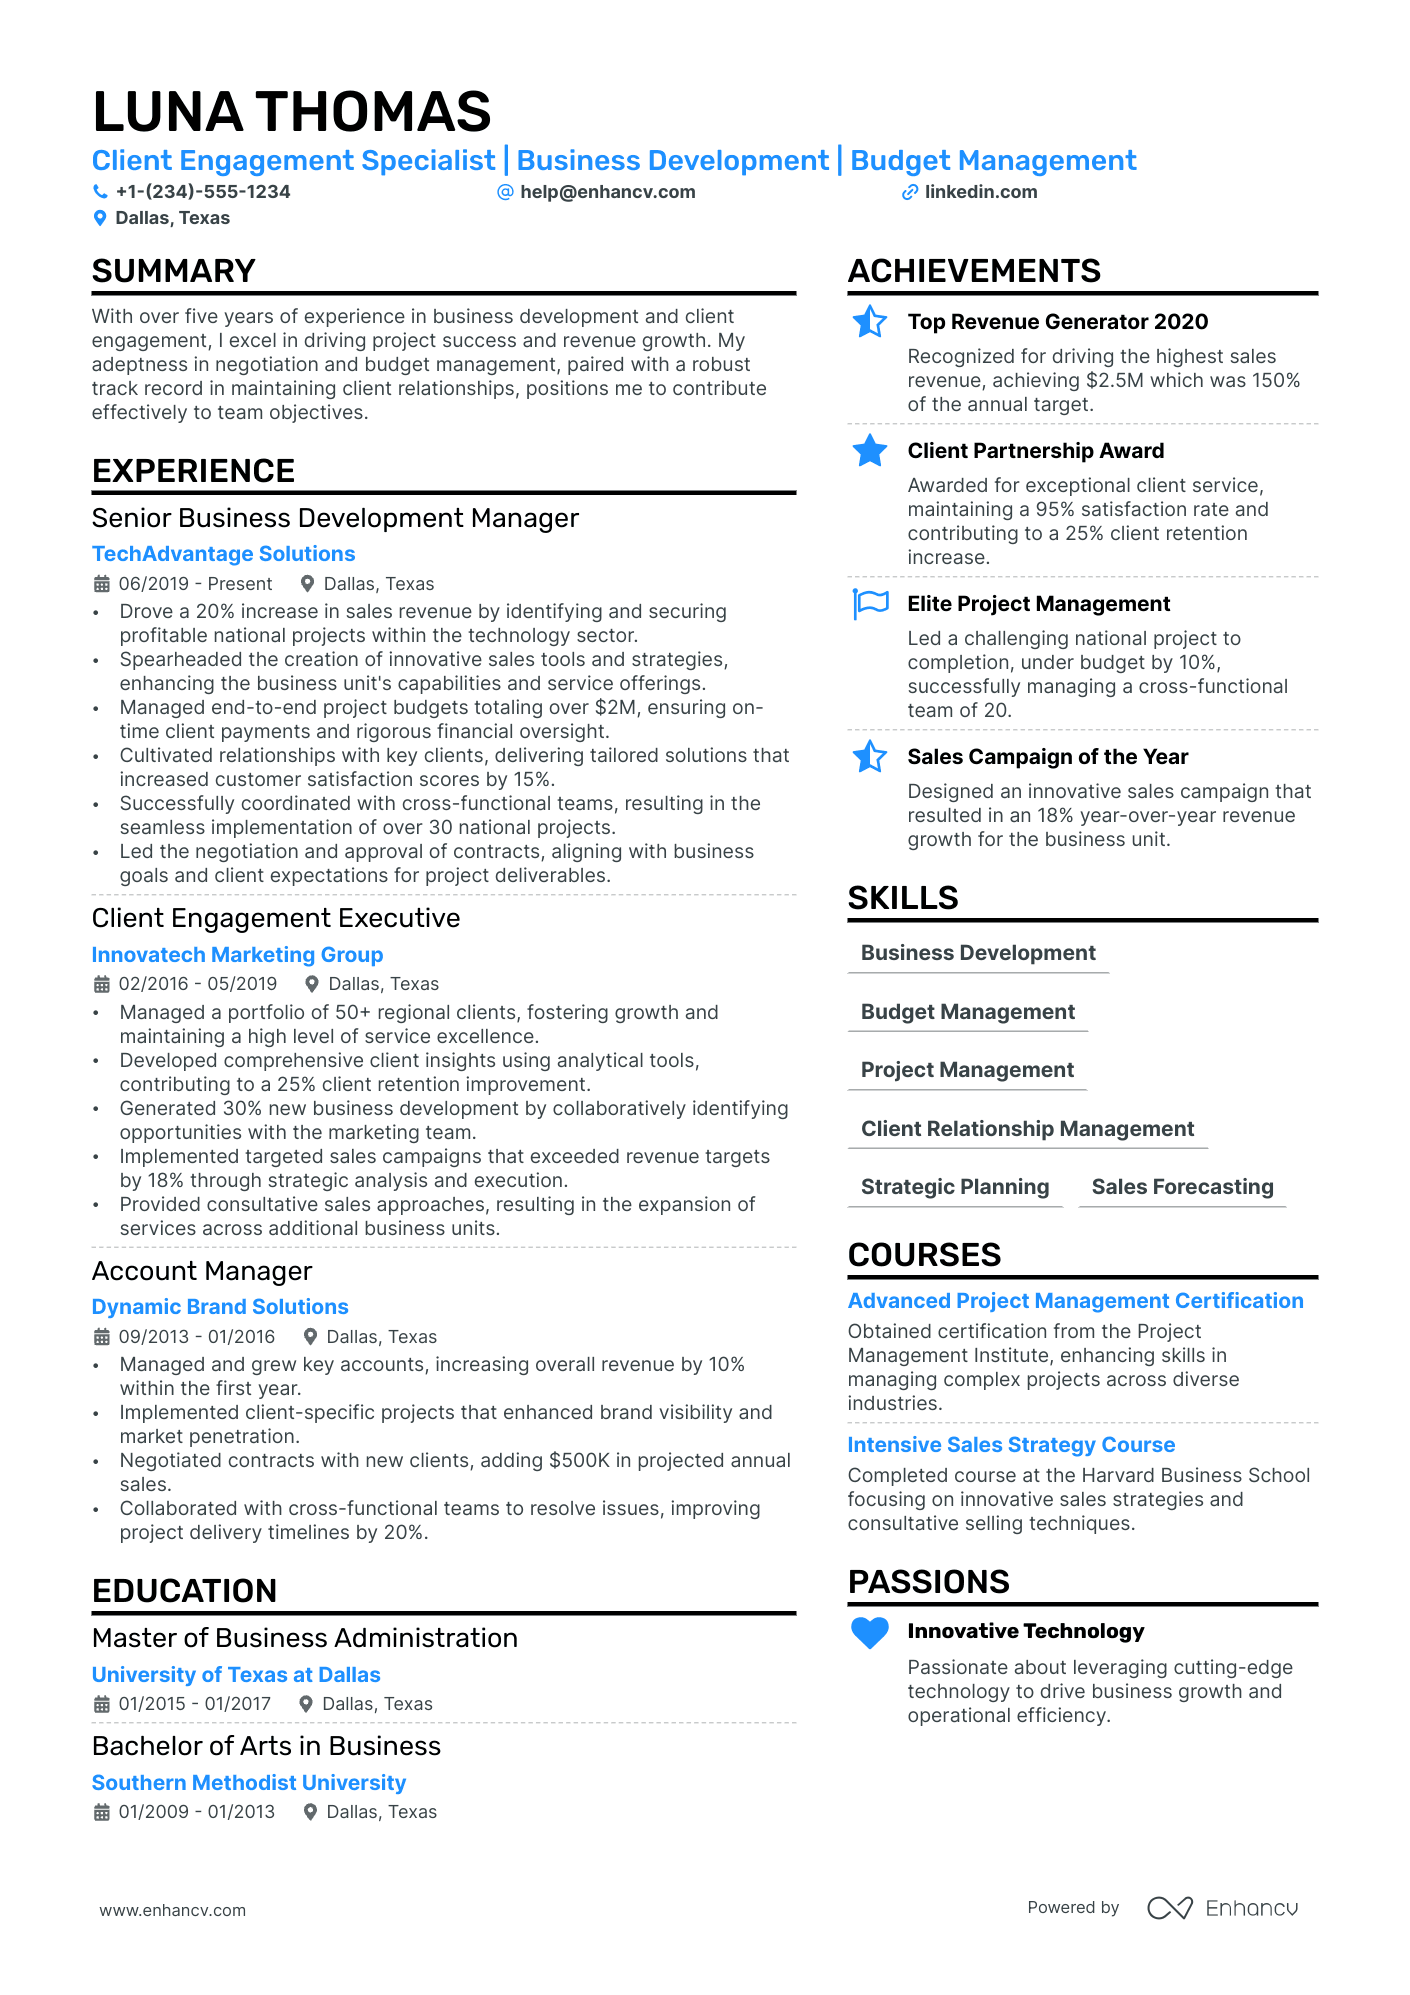 Client Engagement Manager resume example